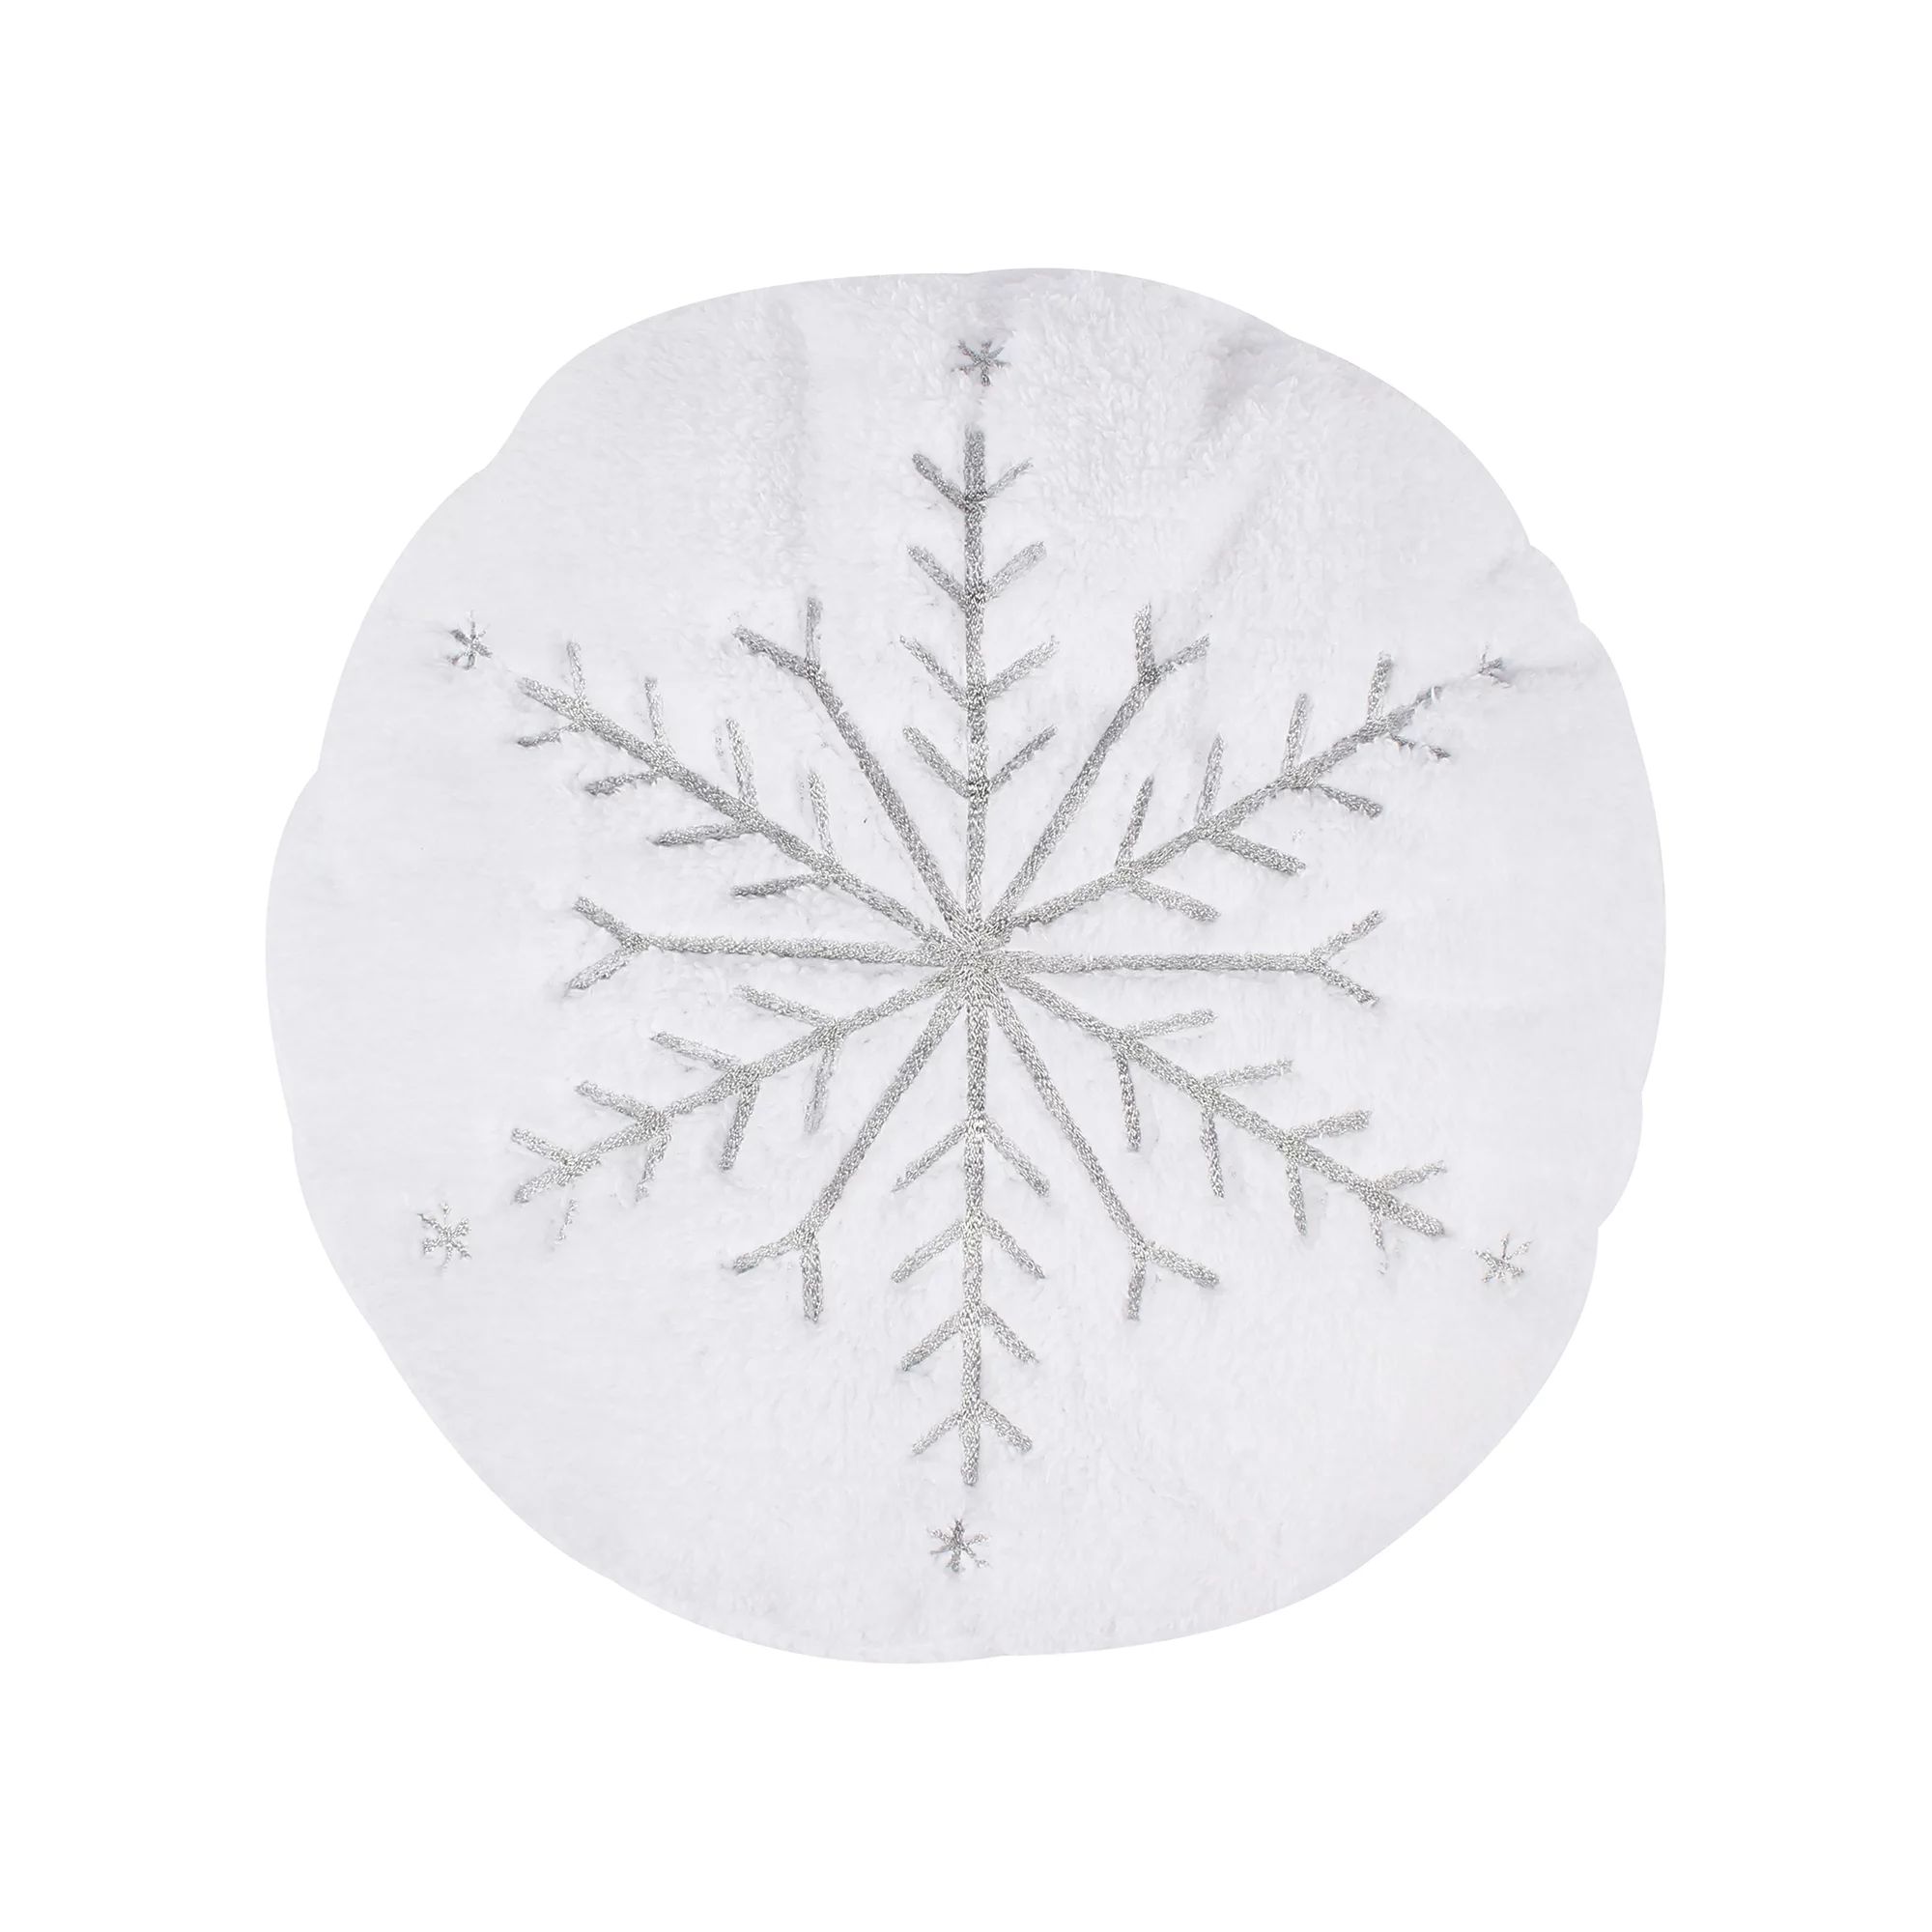 Levtex Home - O Christmas Tree - Decorative Pillow (16in. Round) - Snowflake - White and Silver | Walmart (US)